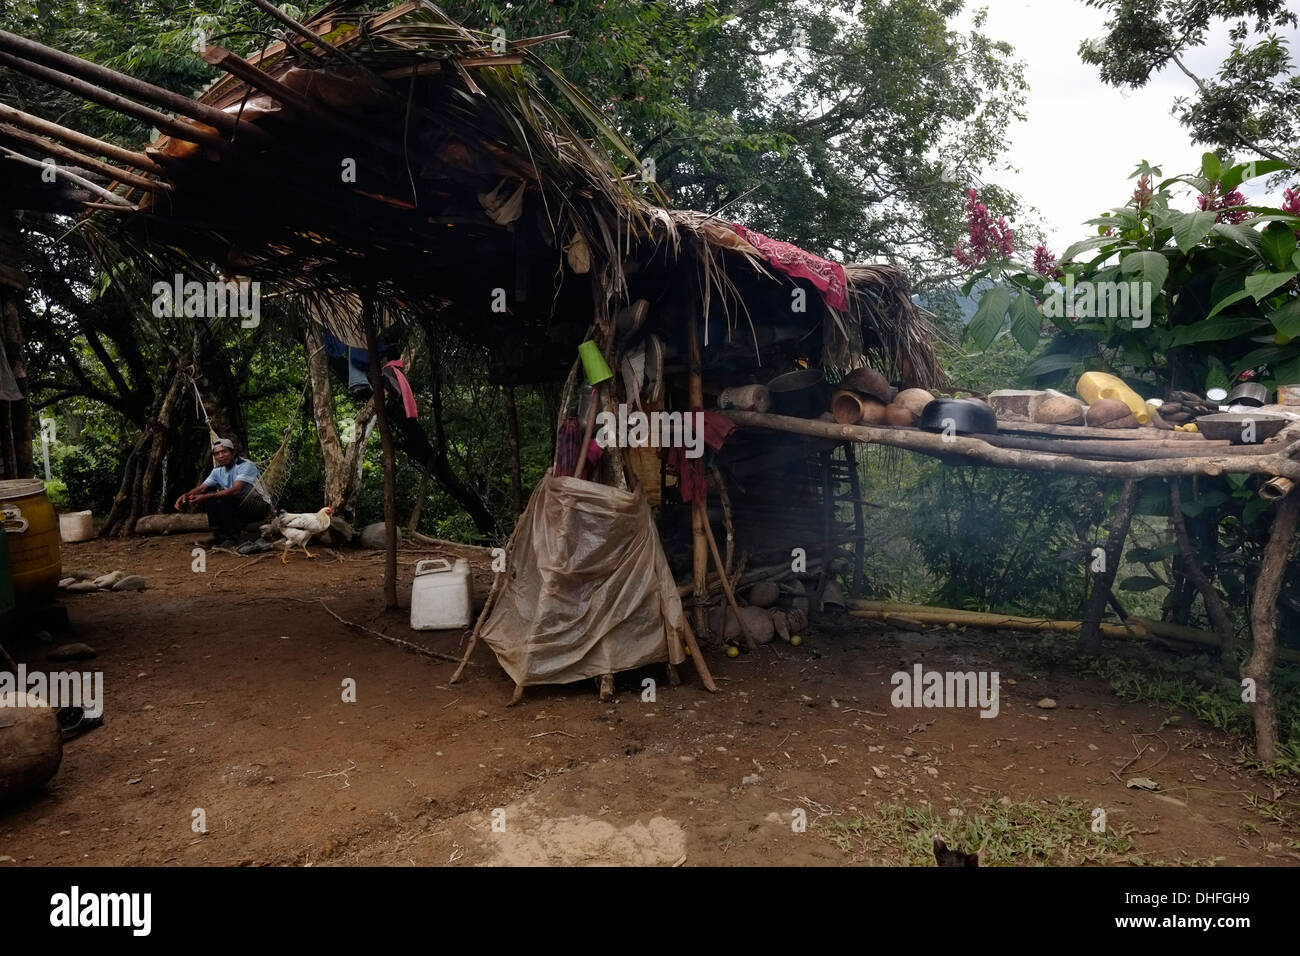 Typical habitation of the Ngabe & Bugle native ethnic group located in the Comarca Quebrado region, Guabo reservation in Chiriqui province Republic of Panama Stock Photo